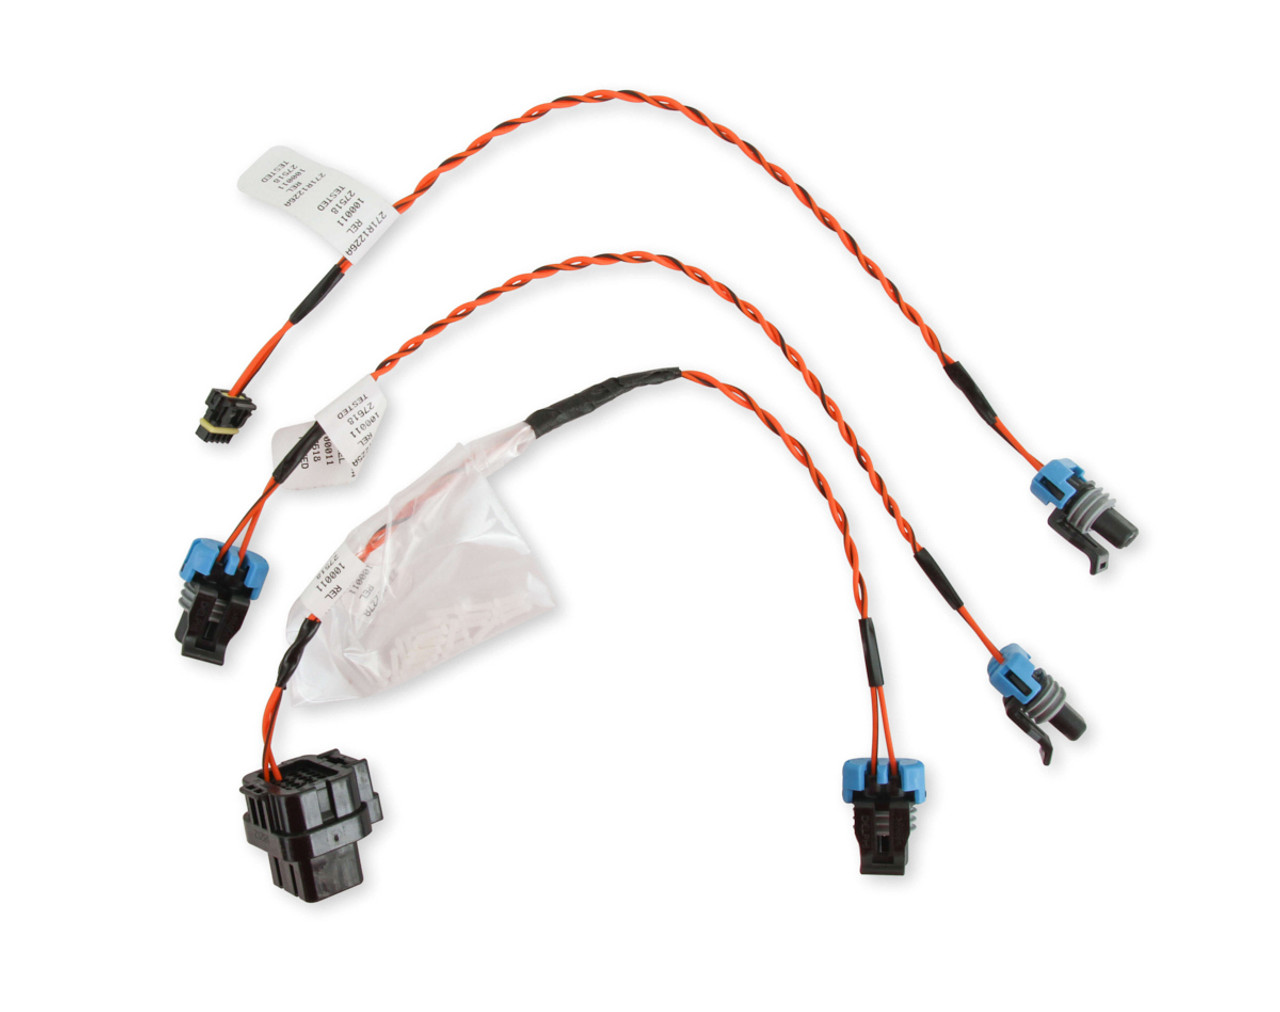 Holley Holley EFI to RacePak Can Cables Adapter Kit